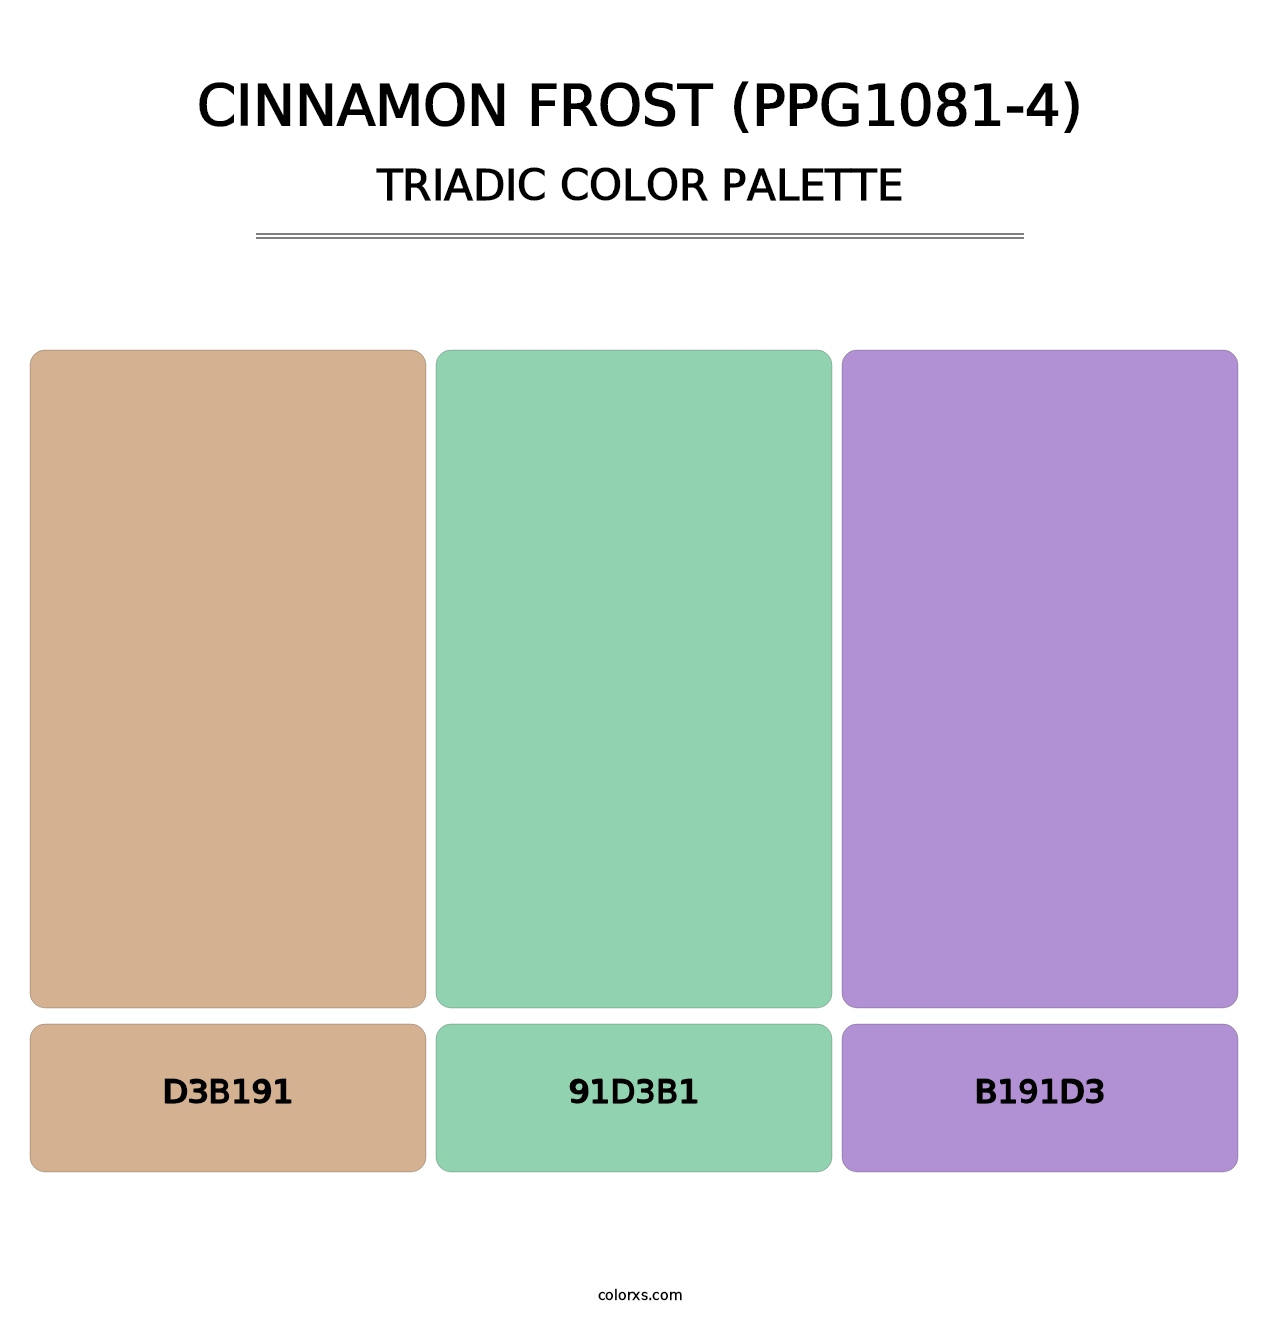 Cinnamon Frost (PPG1081-4) - Triadic Color Palette